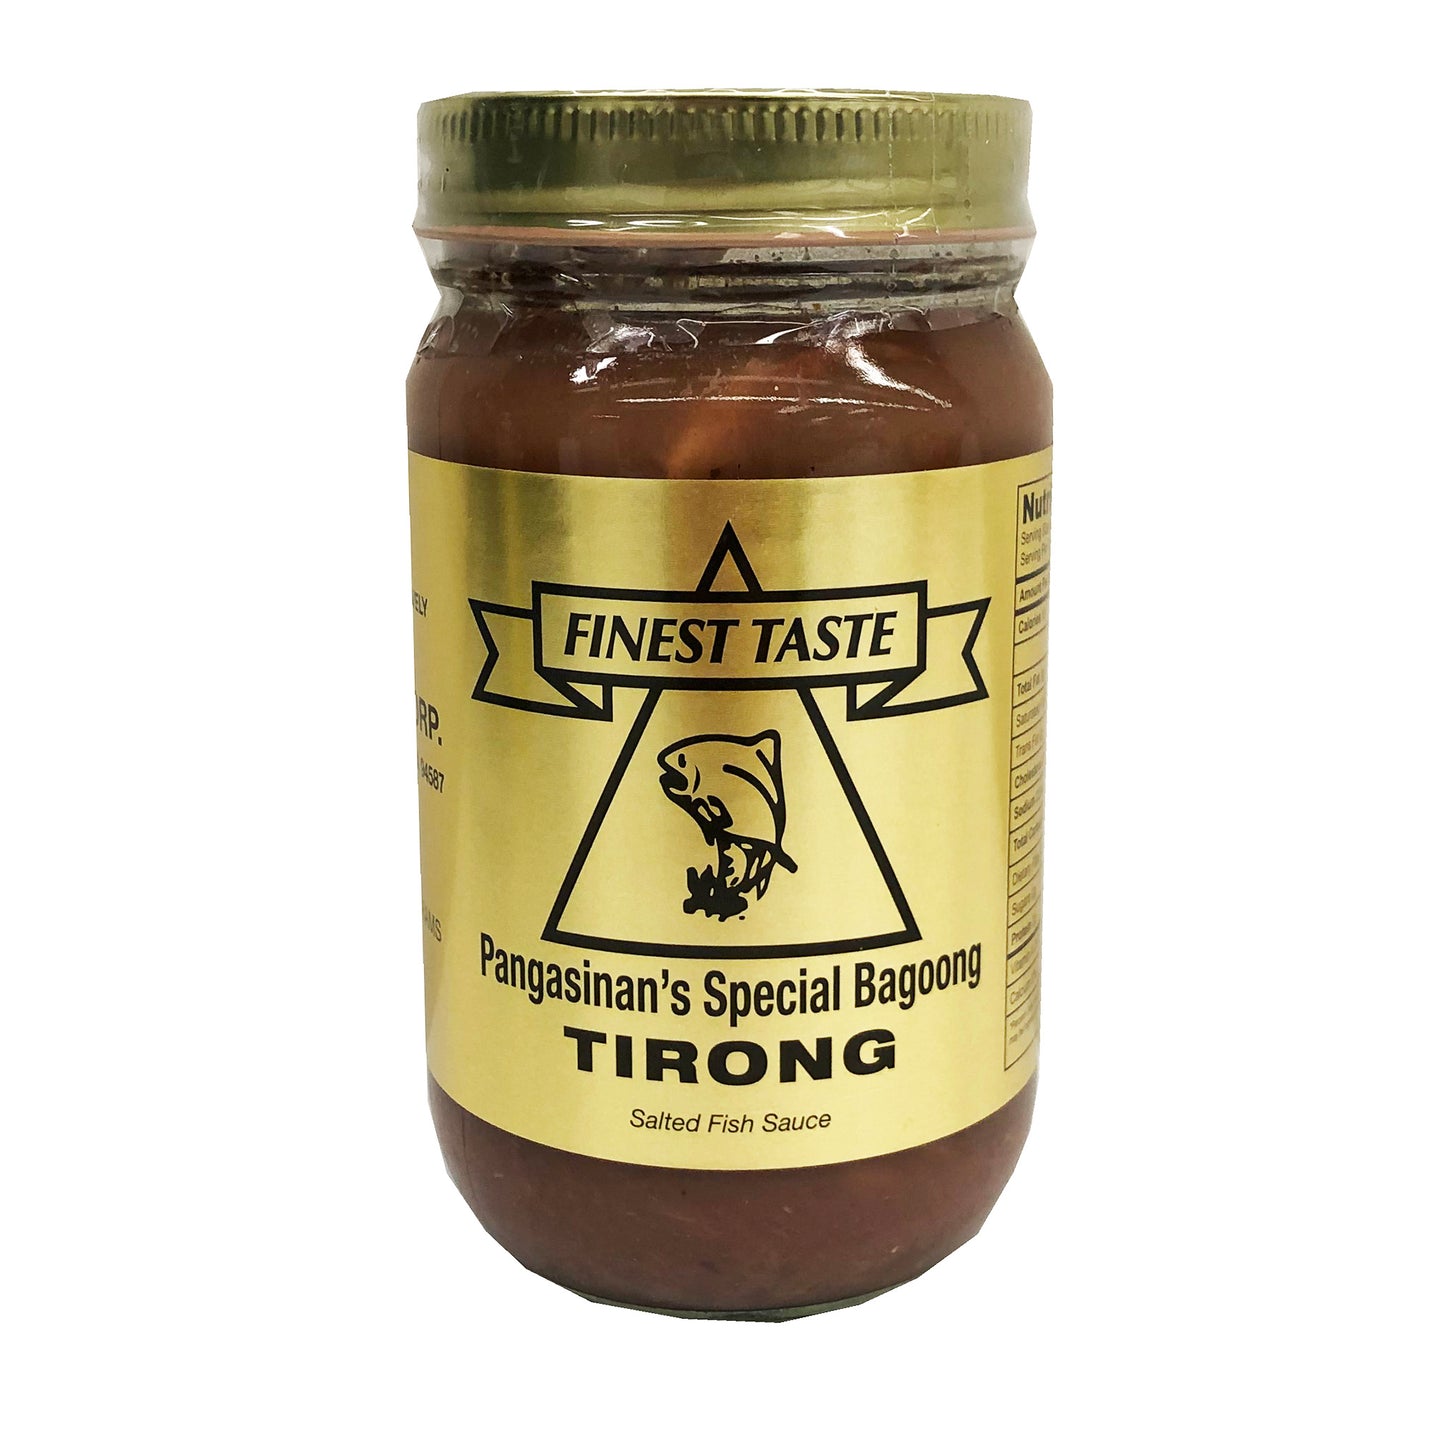 Front graphic image of Finest Taste Pangasinan's Special Bagoong Tirong 16oz